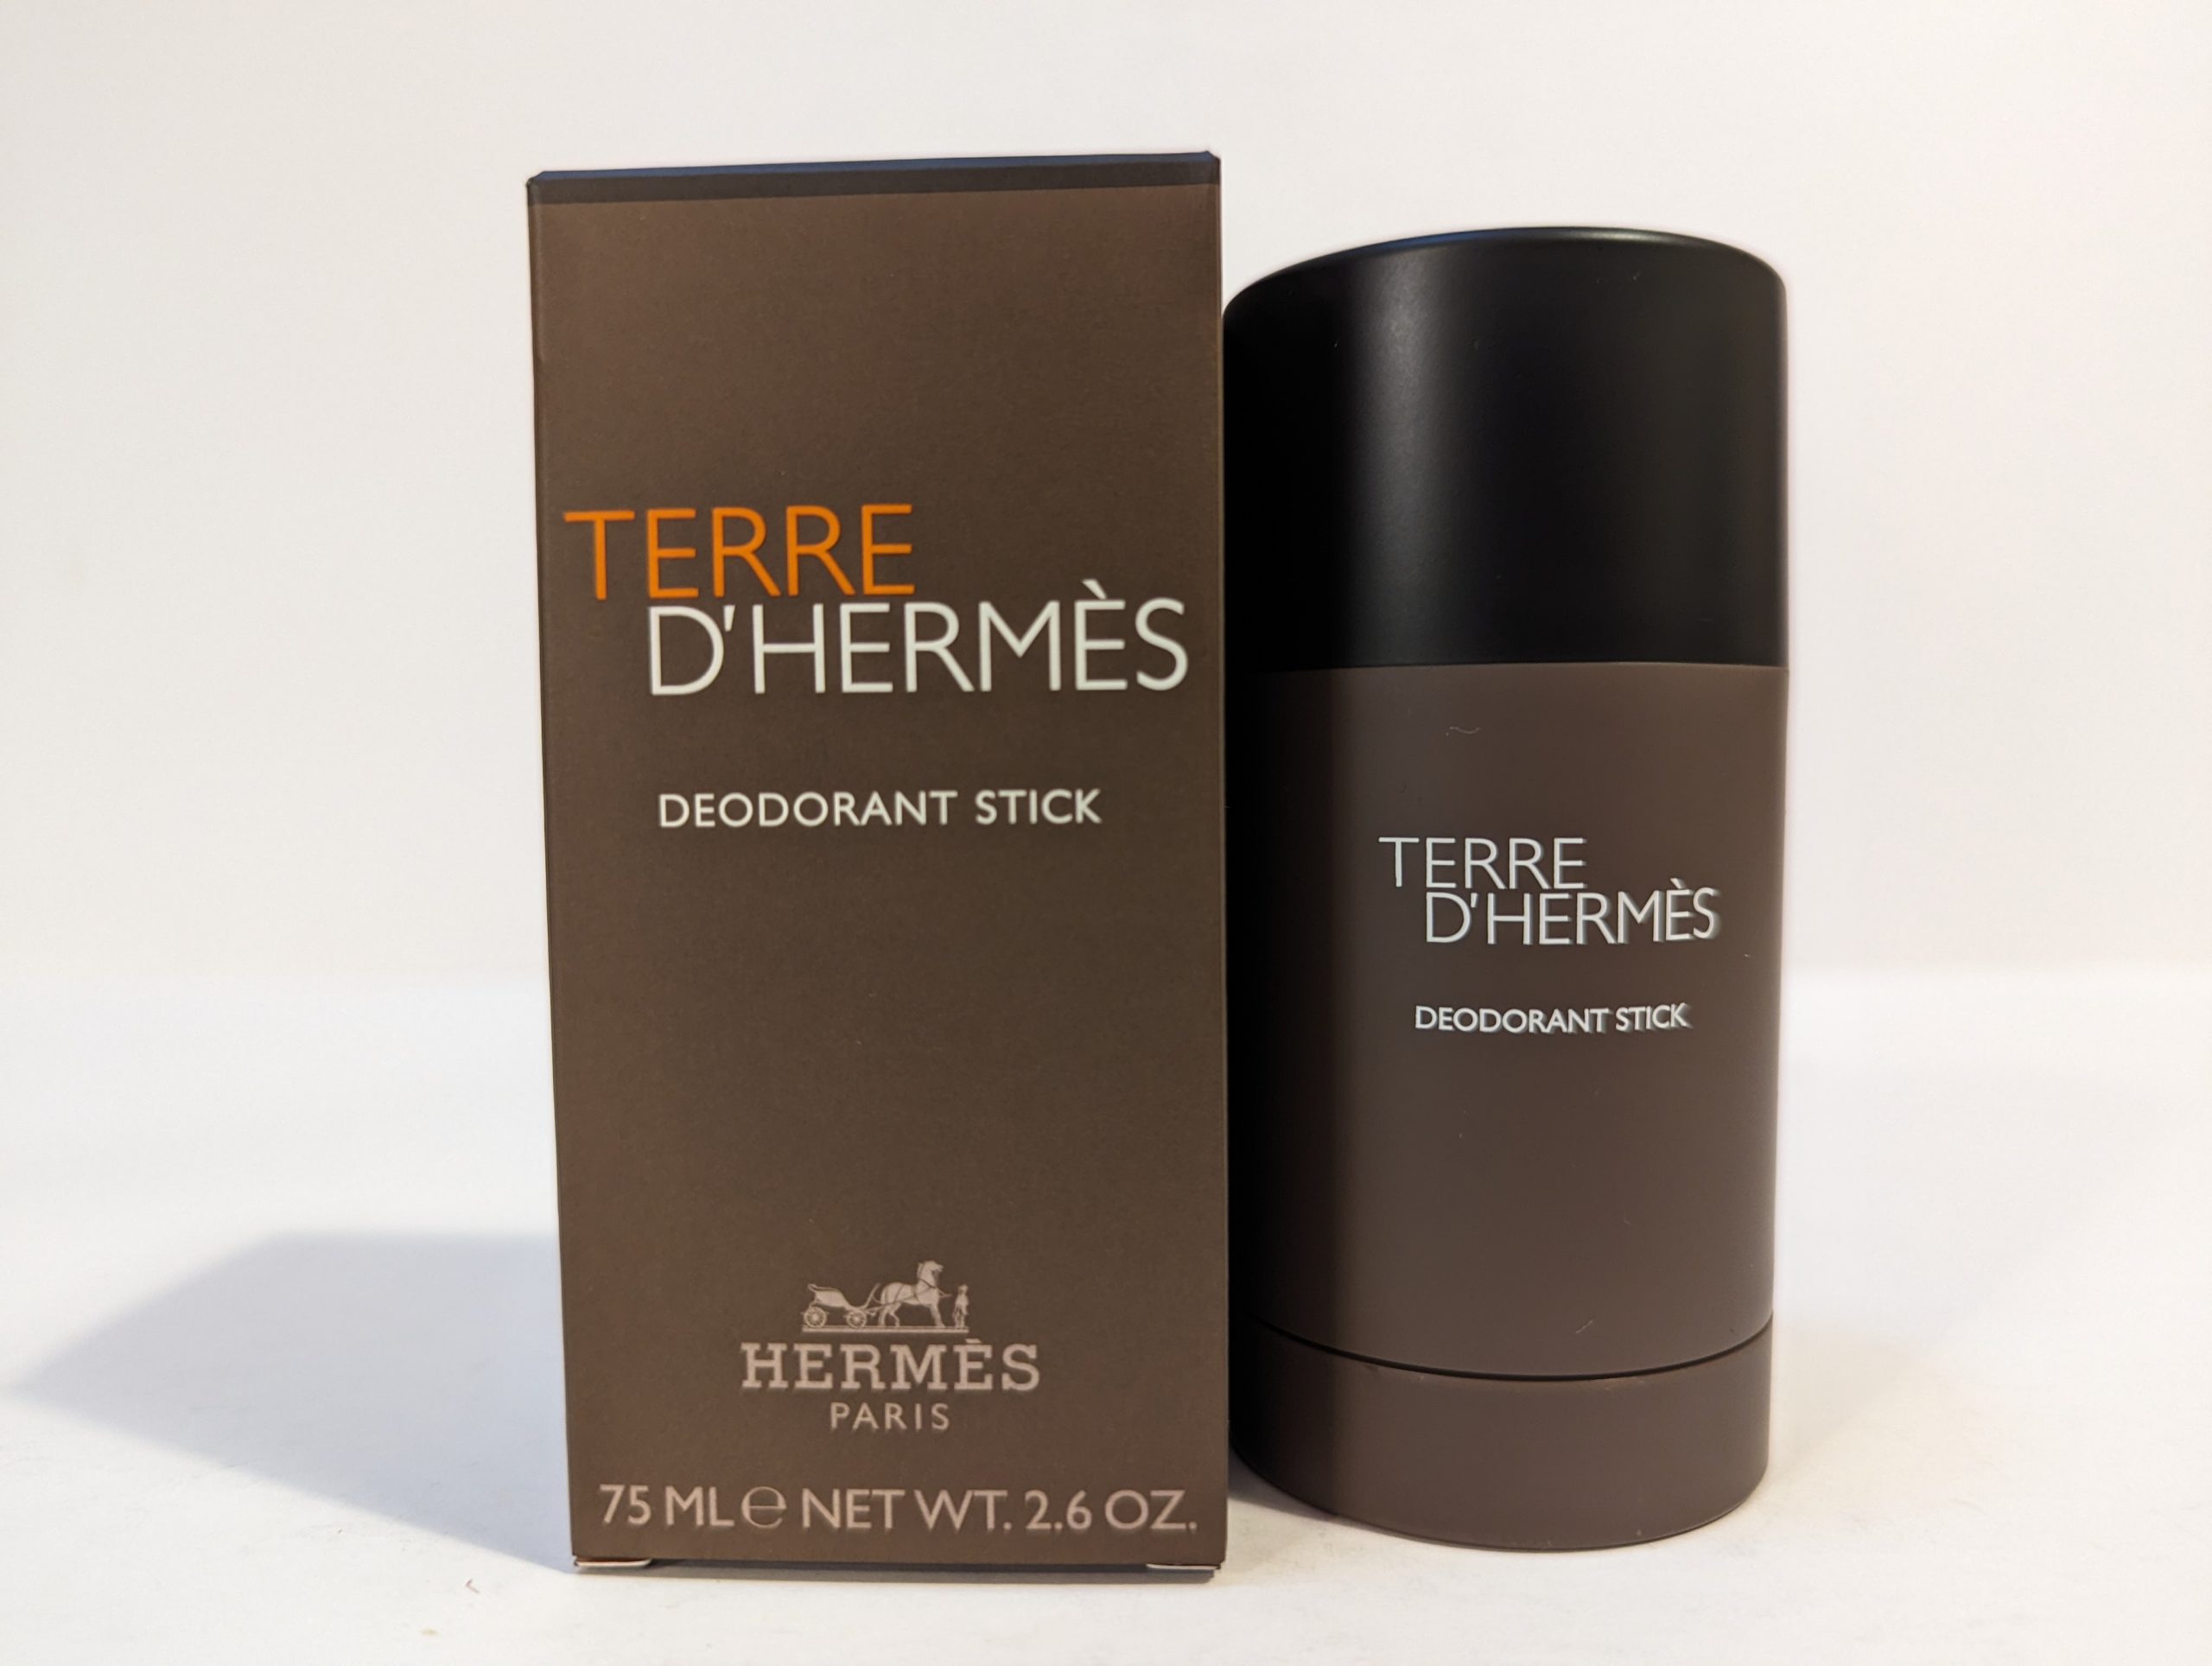 A 75 ml Terre D’Hermès deodorant stick is placed beside its brown packaging box on a plain background.